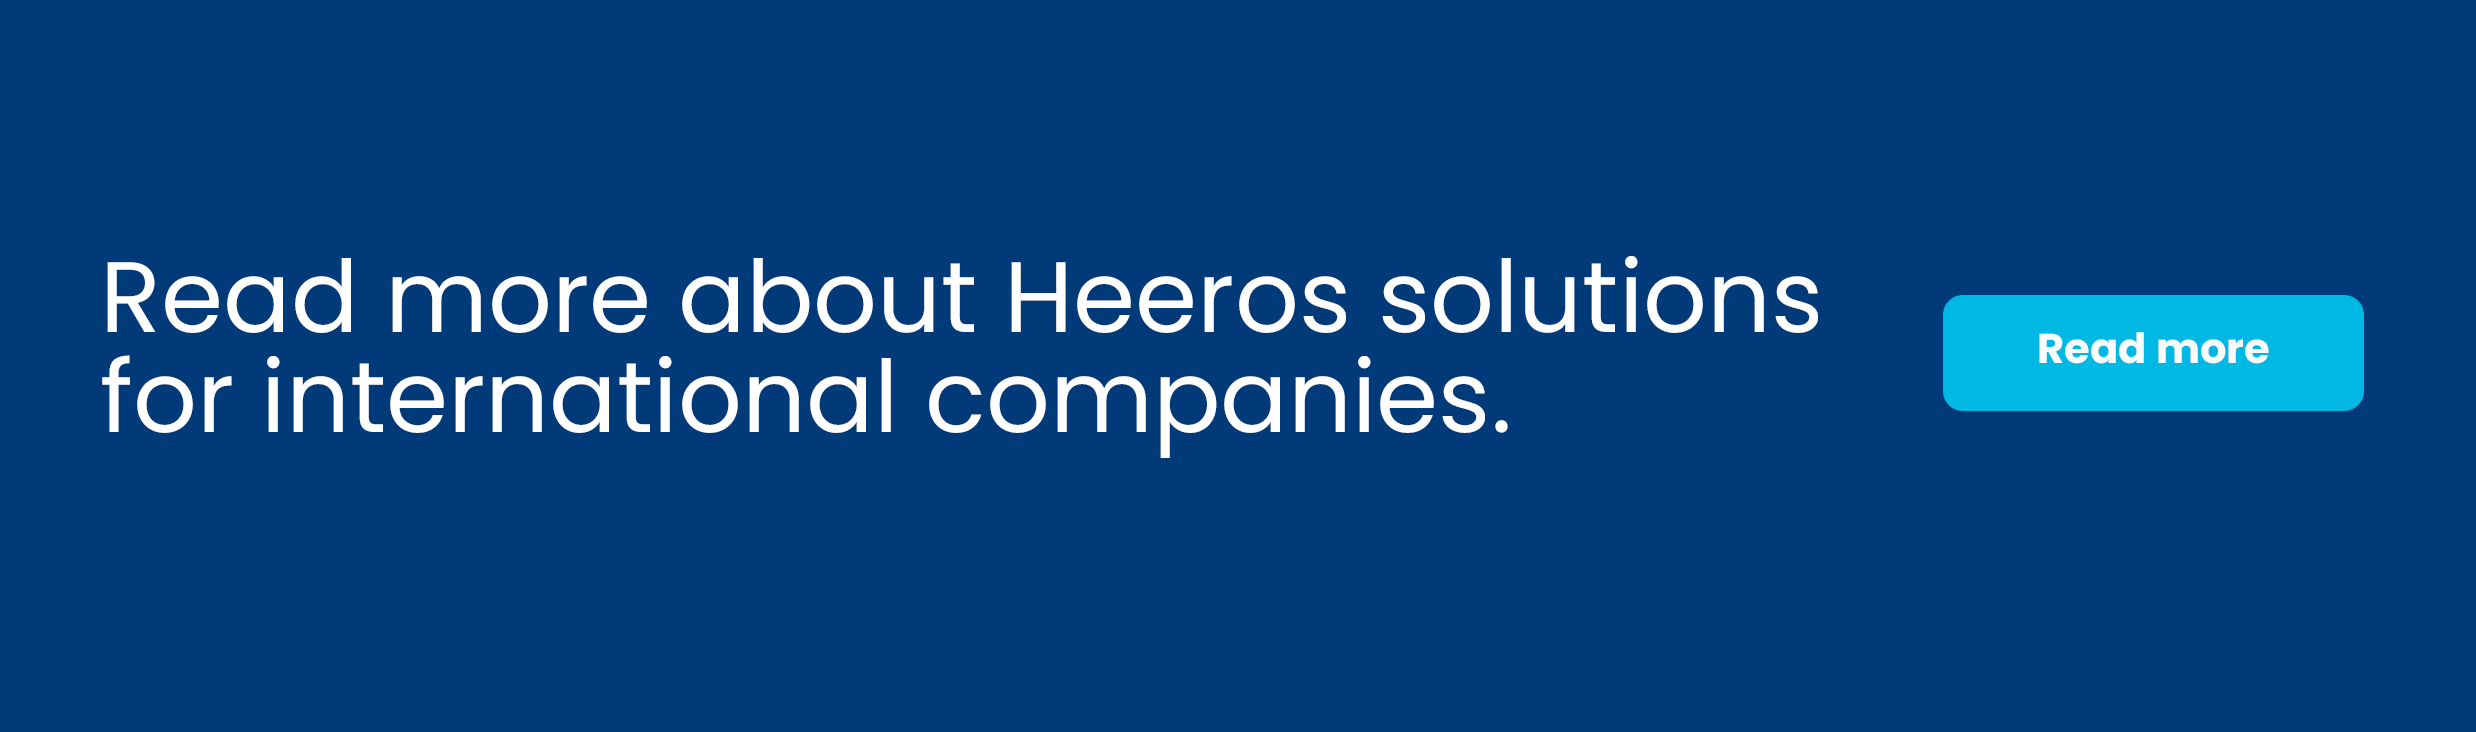 Read-more-about-Heeros-solutions-for-international-companies